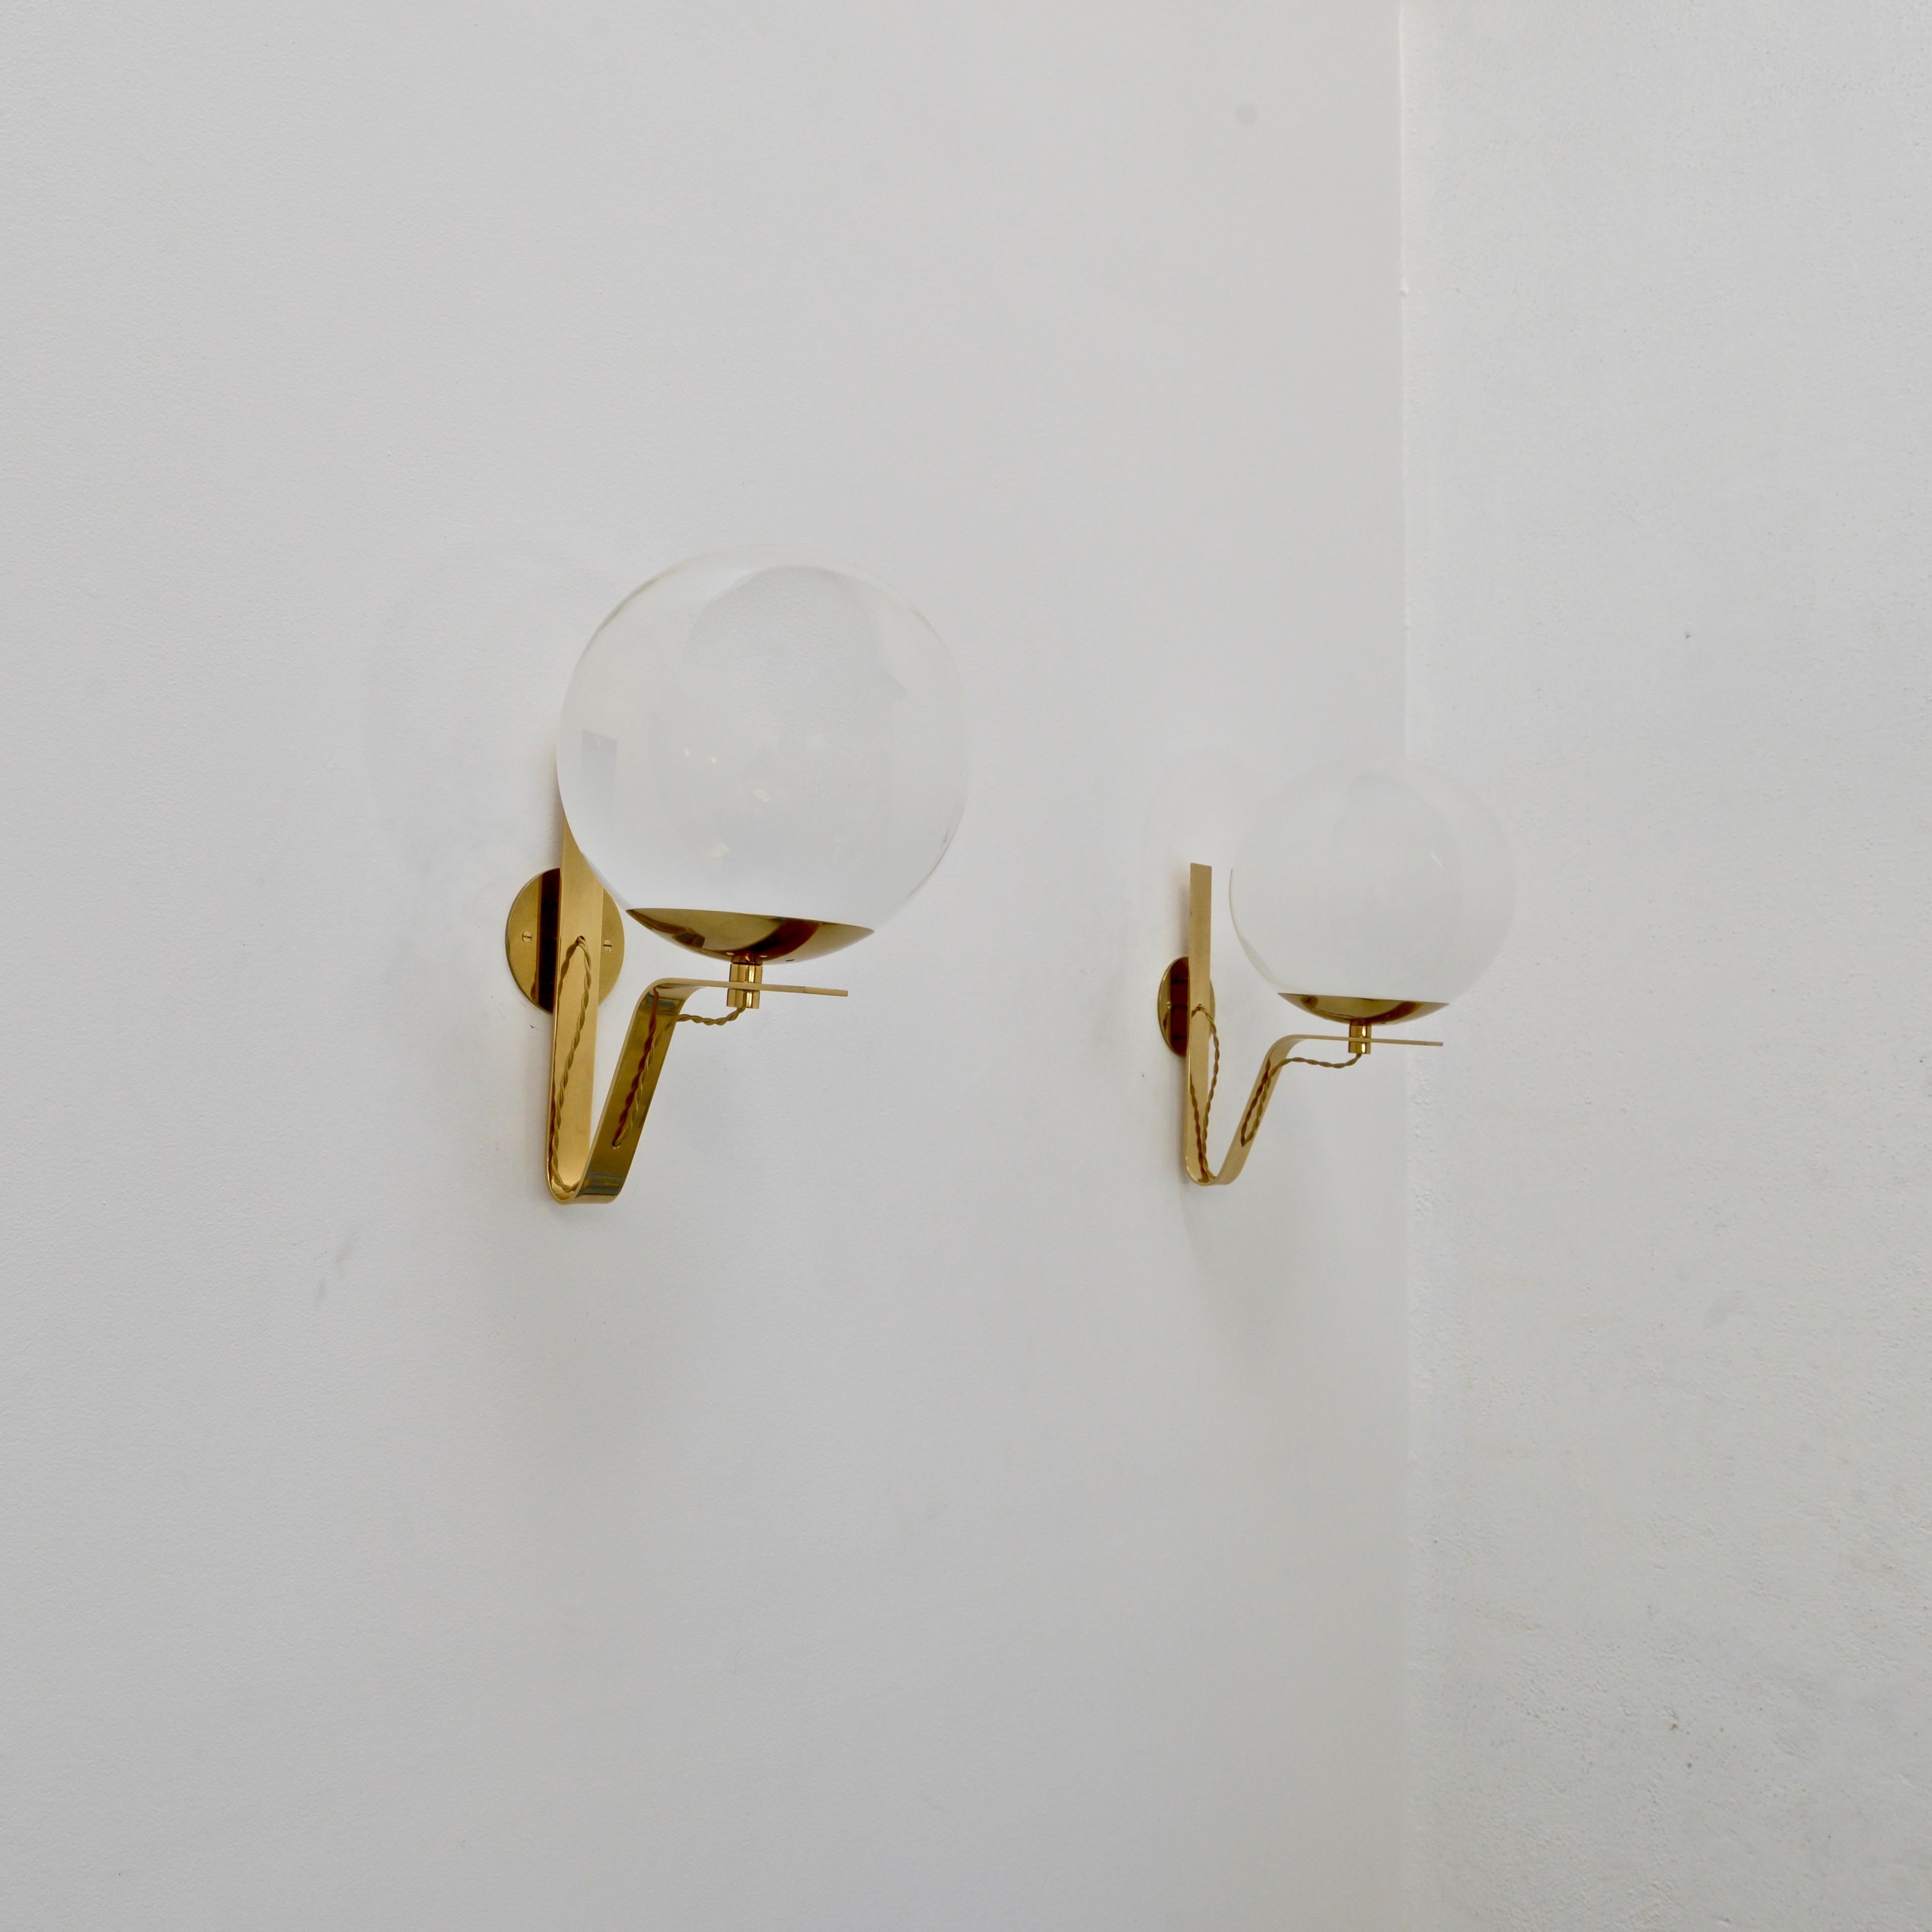 5 Elegant Mid-Century Modern 1950s glass and brass Large Globe Sconces from Italy. Patinated brass hardware finishes and blown glass shades. Single E26 medium based socket per shades. Currently wired for use in the US. 4” back plate. Light bulb